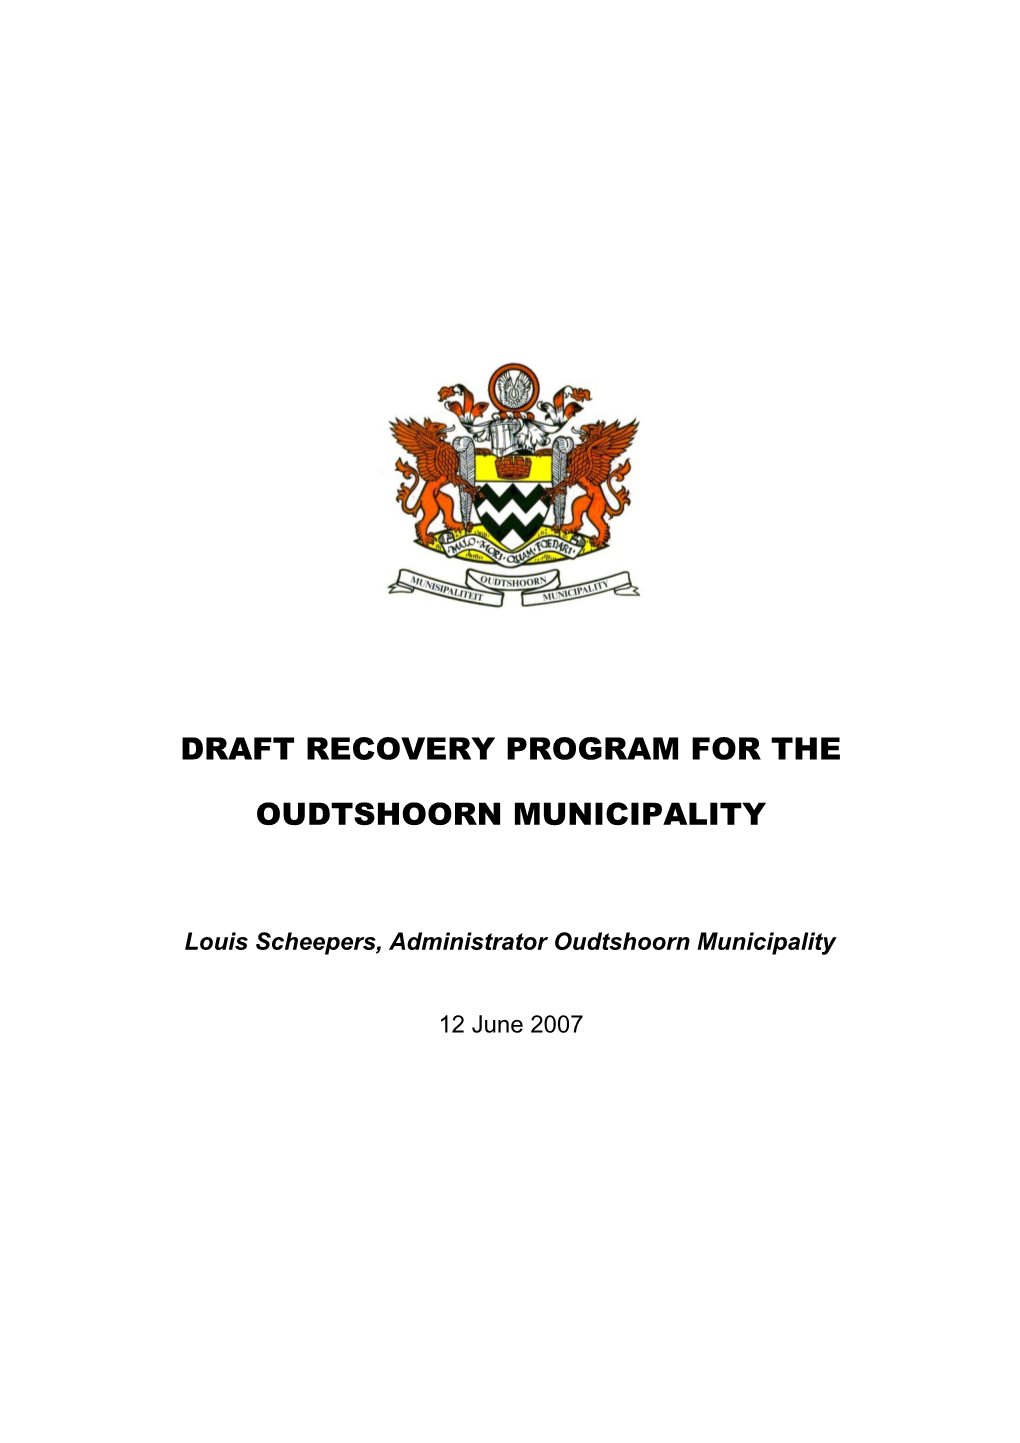 Draft Recovery Program for the Oudtshoorn Municipality